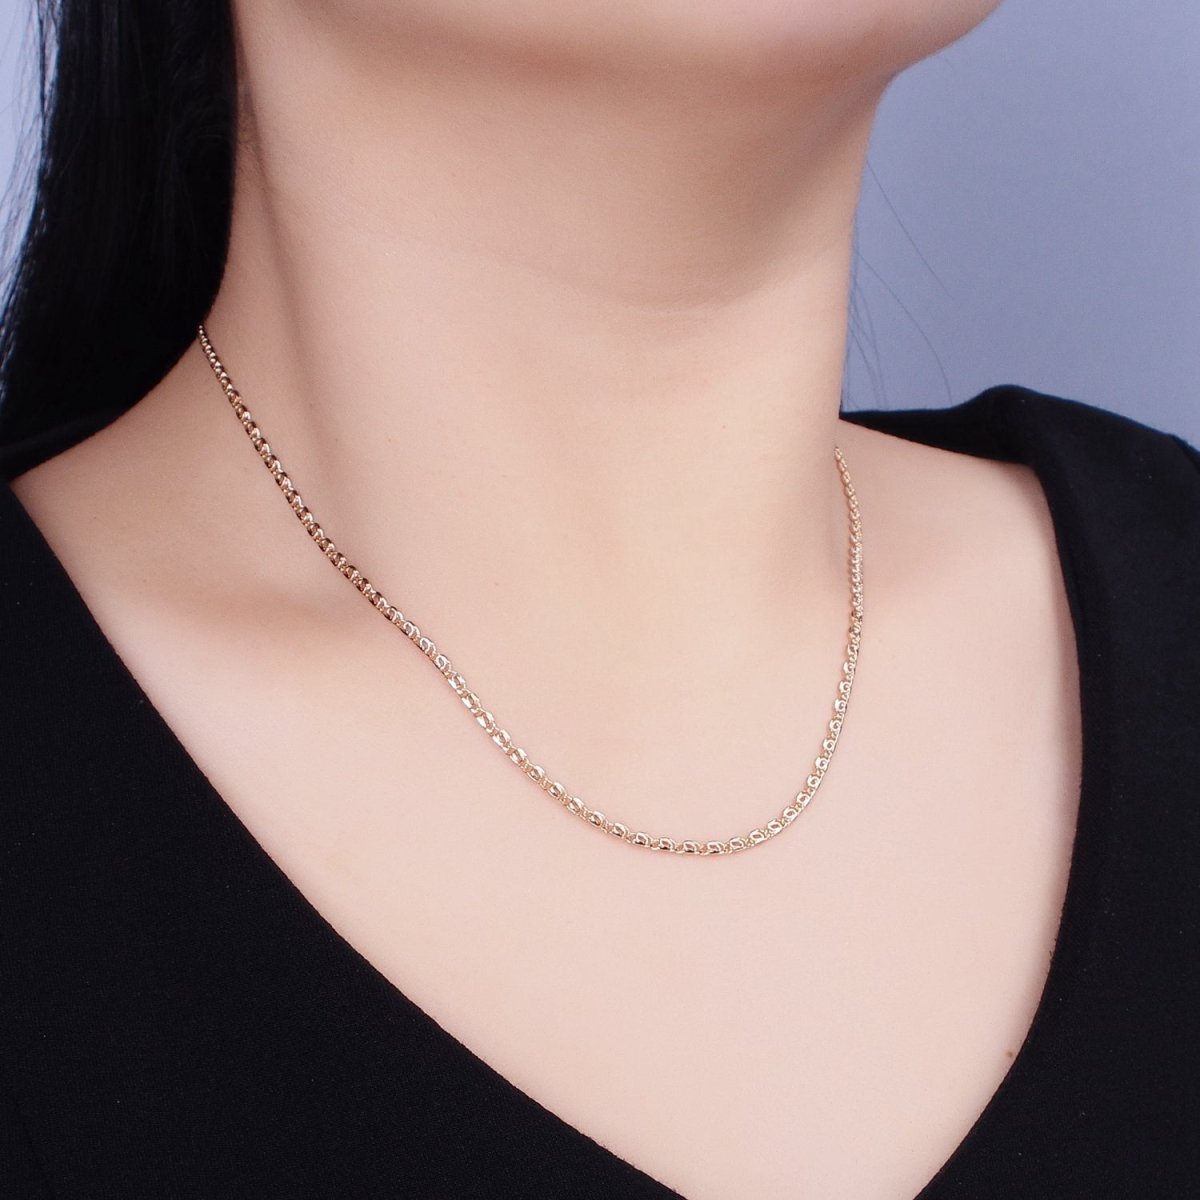 Dainty Scroll Chain Necklace 17.75 inch, 19.6 inch Long Ready to Wear Necklace in 18k Gold Filled | WA-1680 WA-1681 WA-1682 WA-1683 Clearance Pricing - DLUXCA